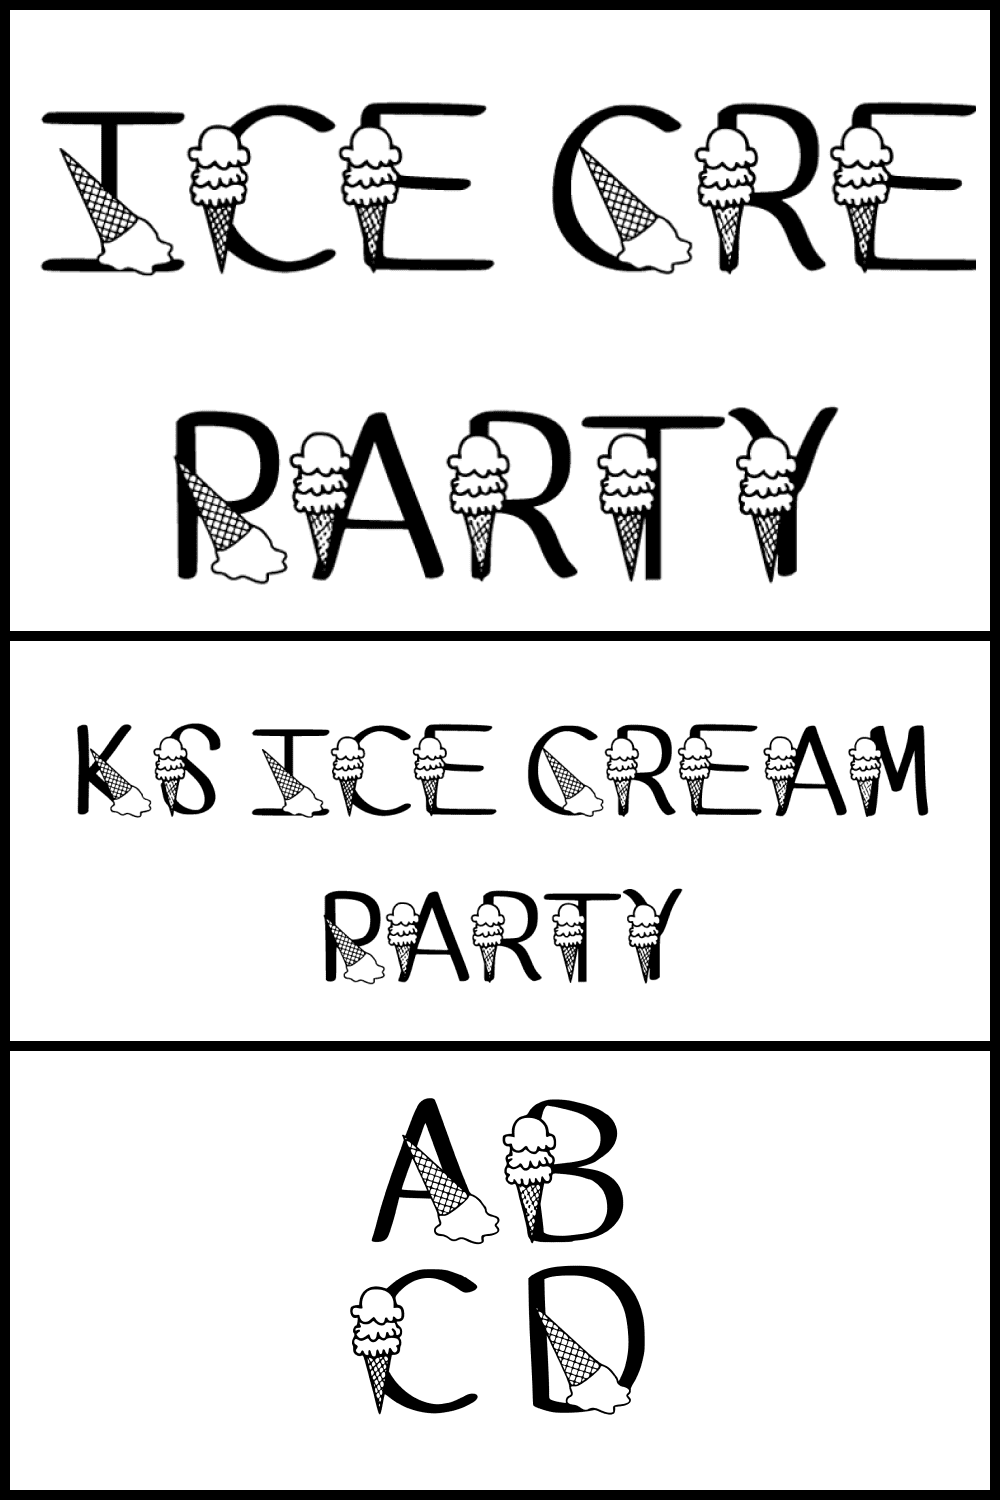 Font with ice-cream illustrated.